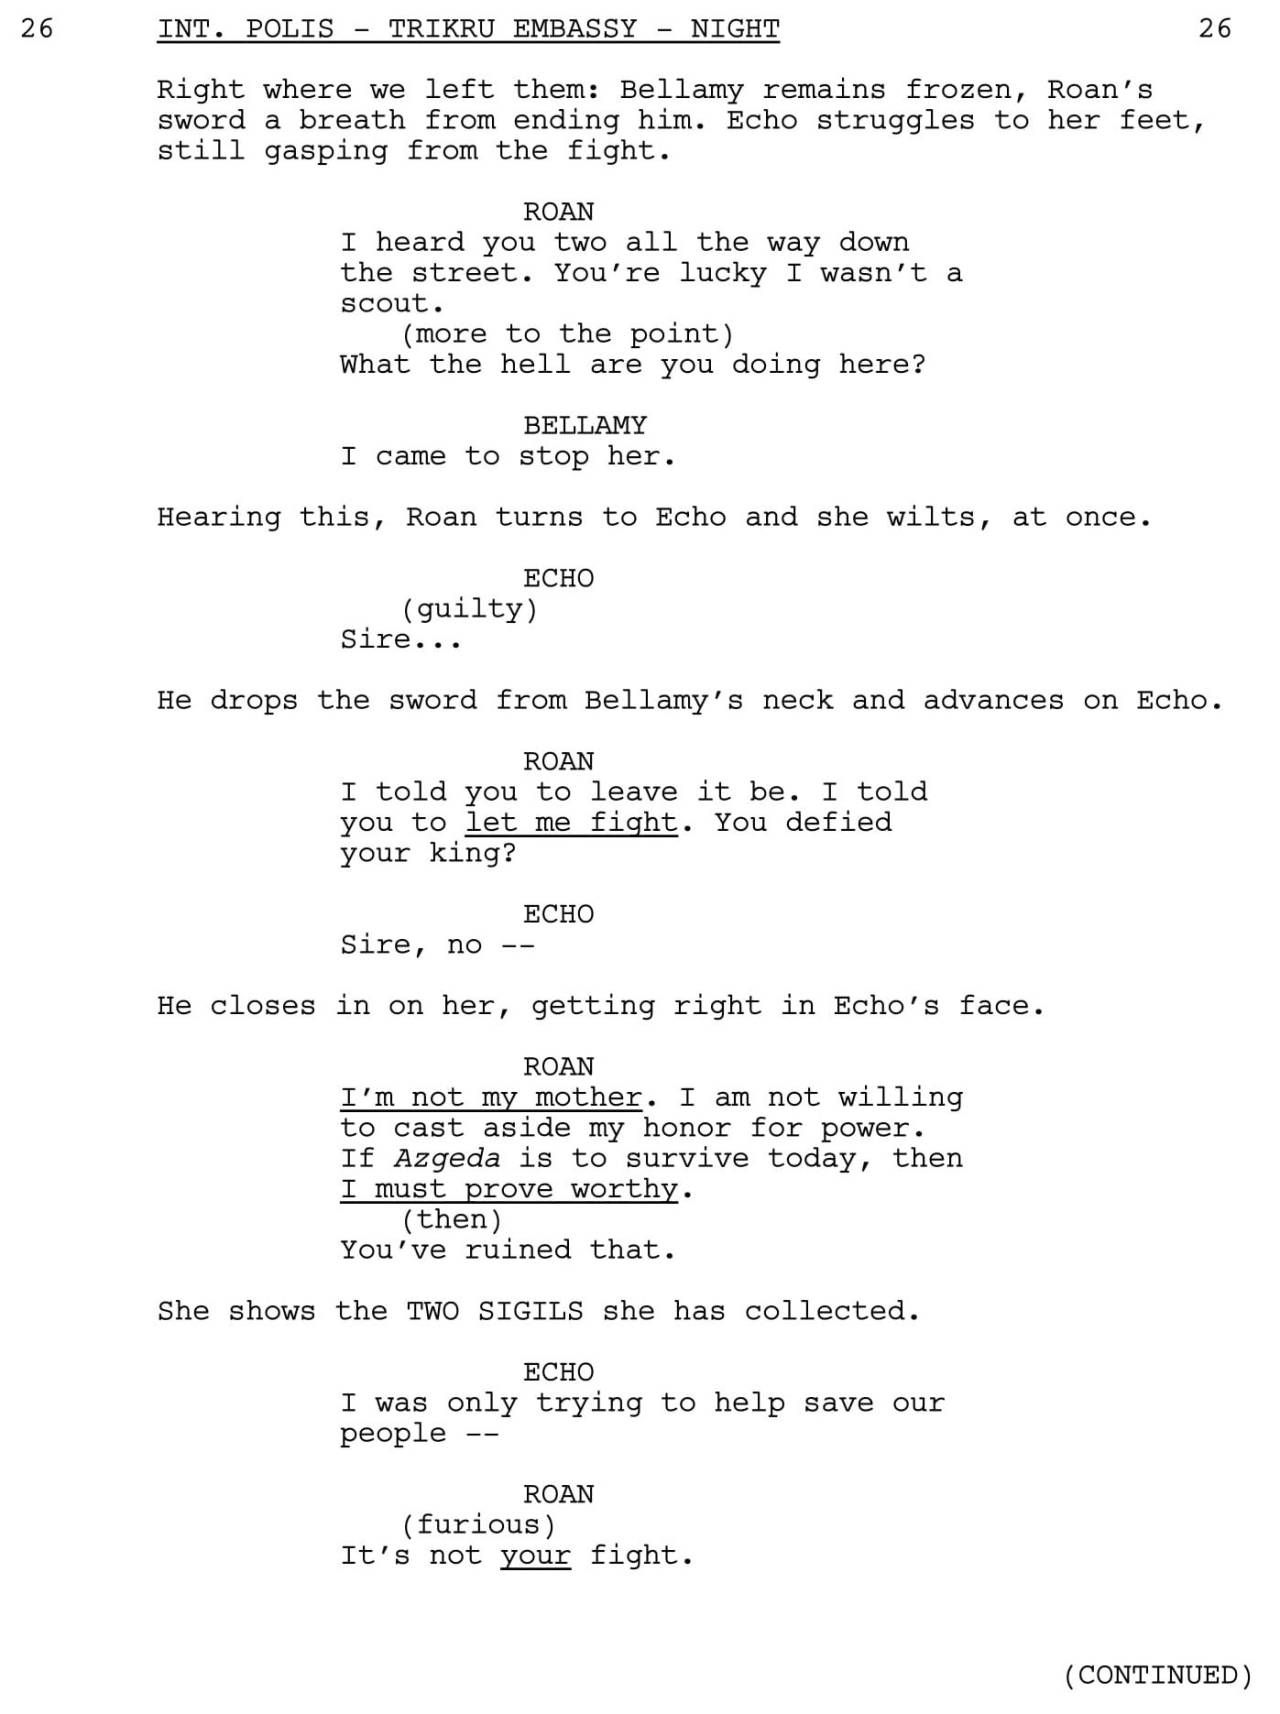 We’re back! To start off this Wednesday’s From Script to Screen, here’s a scene